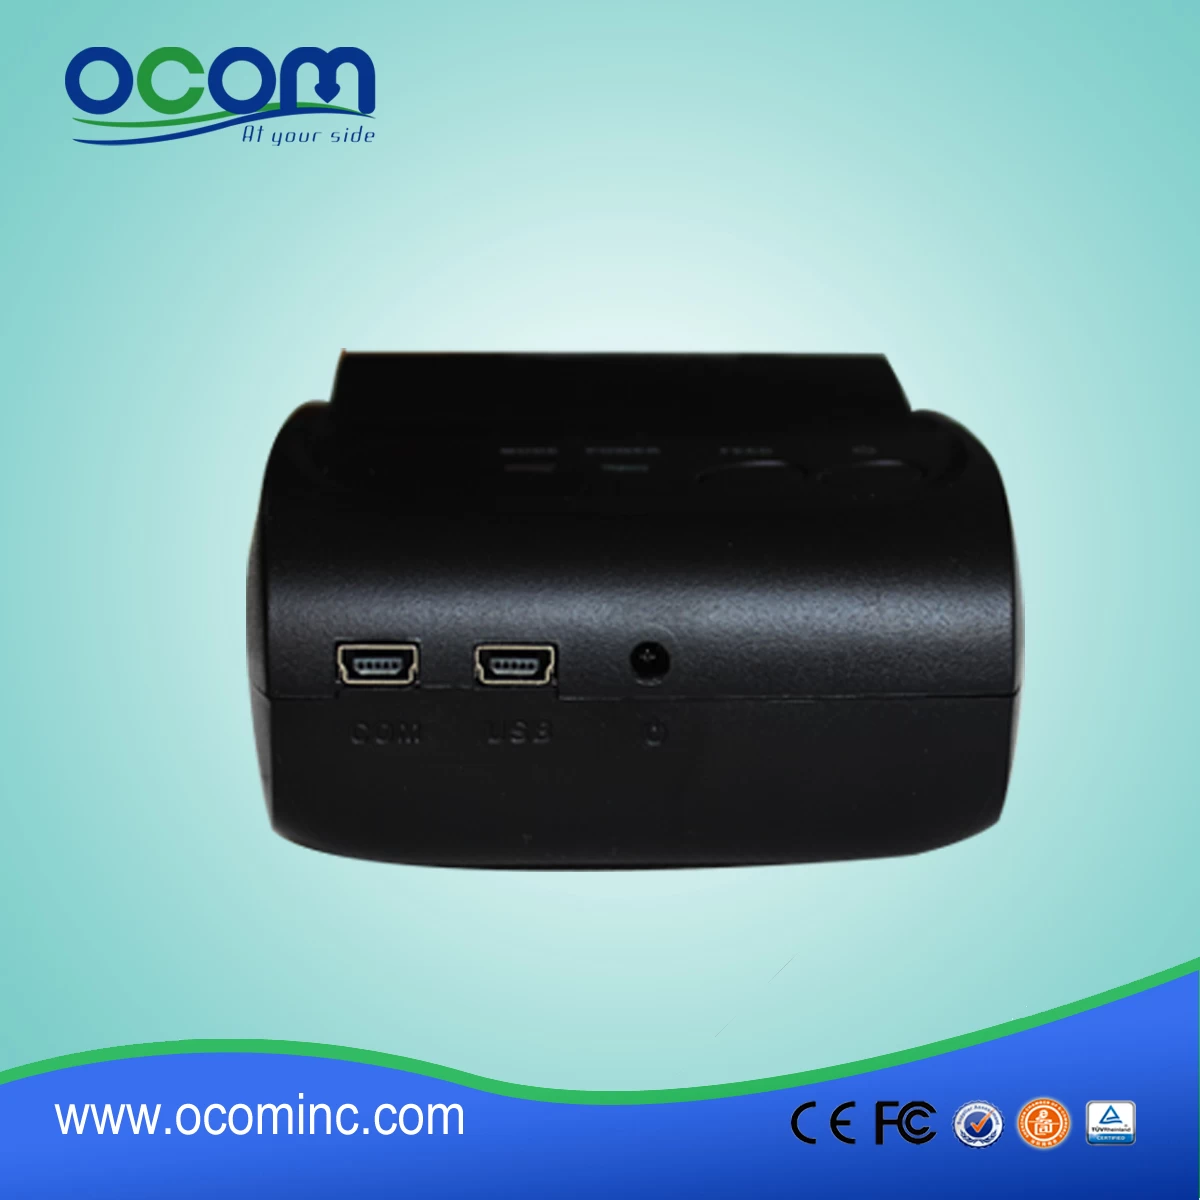 58mm mini Bluetooth Thermal Printer support android phone or tablet